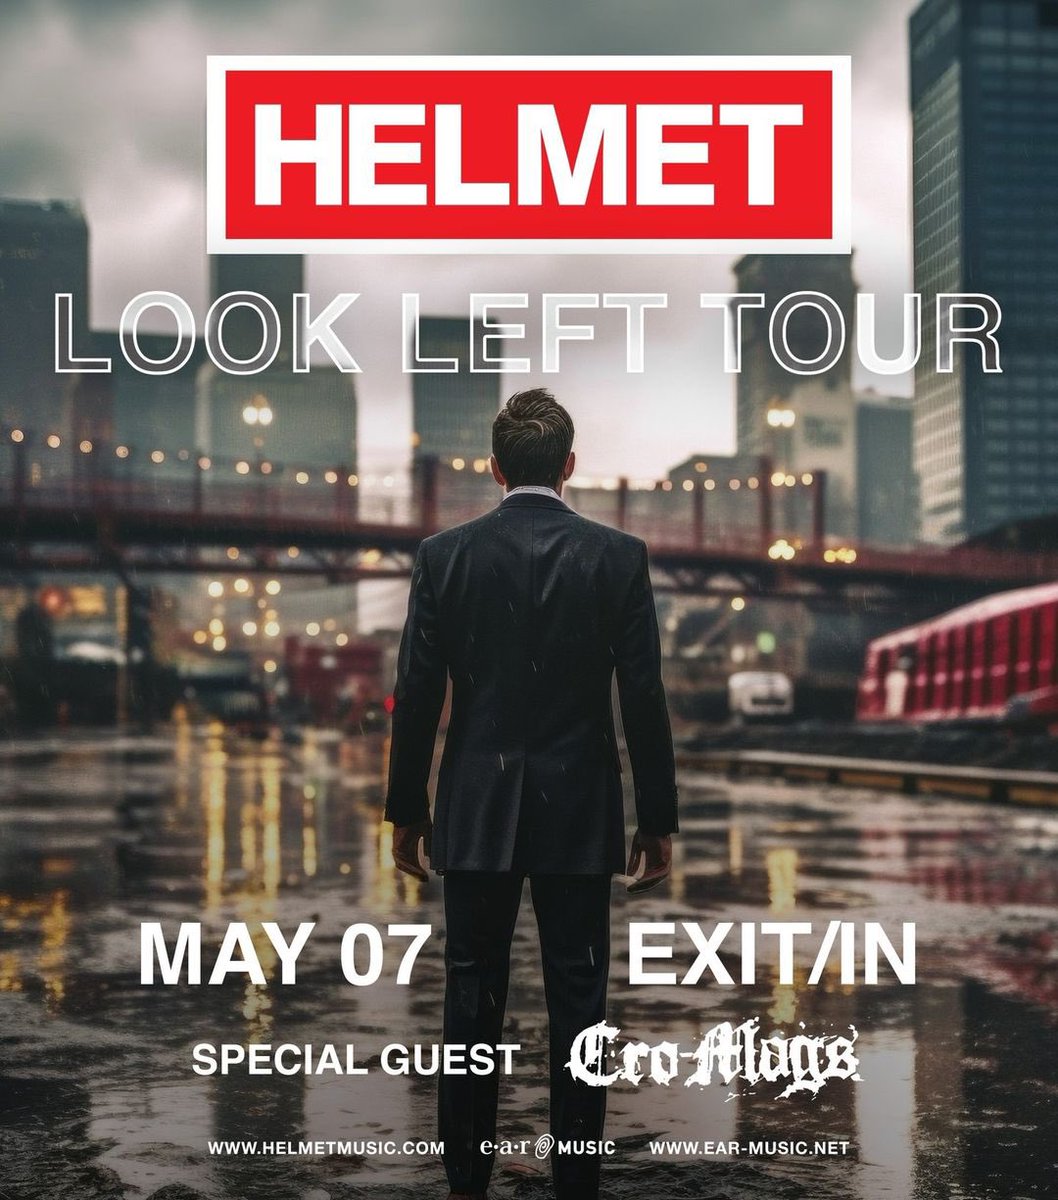 TICKET GIVEAWAY! Supporting their latest album, Left, Helmet return to Nashville on May 7th at Exit/In with Cro-Mags and we have a pair of tickets! Check out the latest post at instagr.am/nashvilleisthe… for a chance to win! #nashvilleisthereason